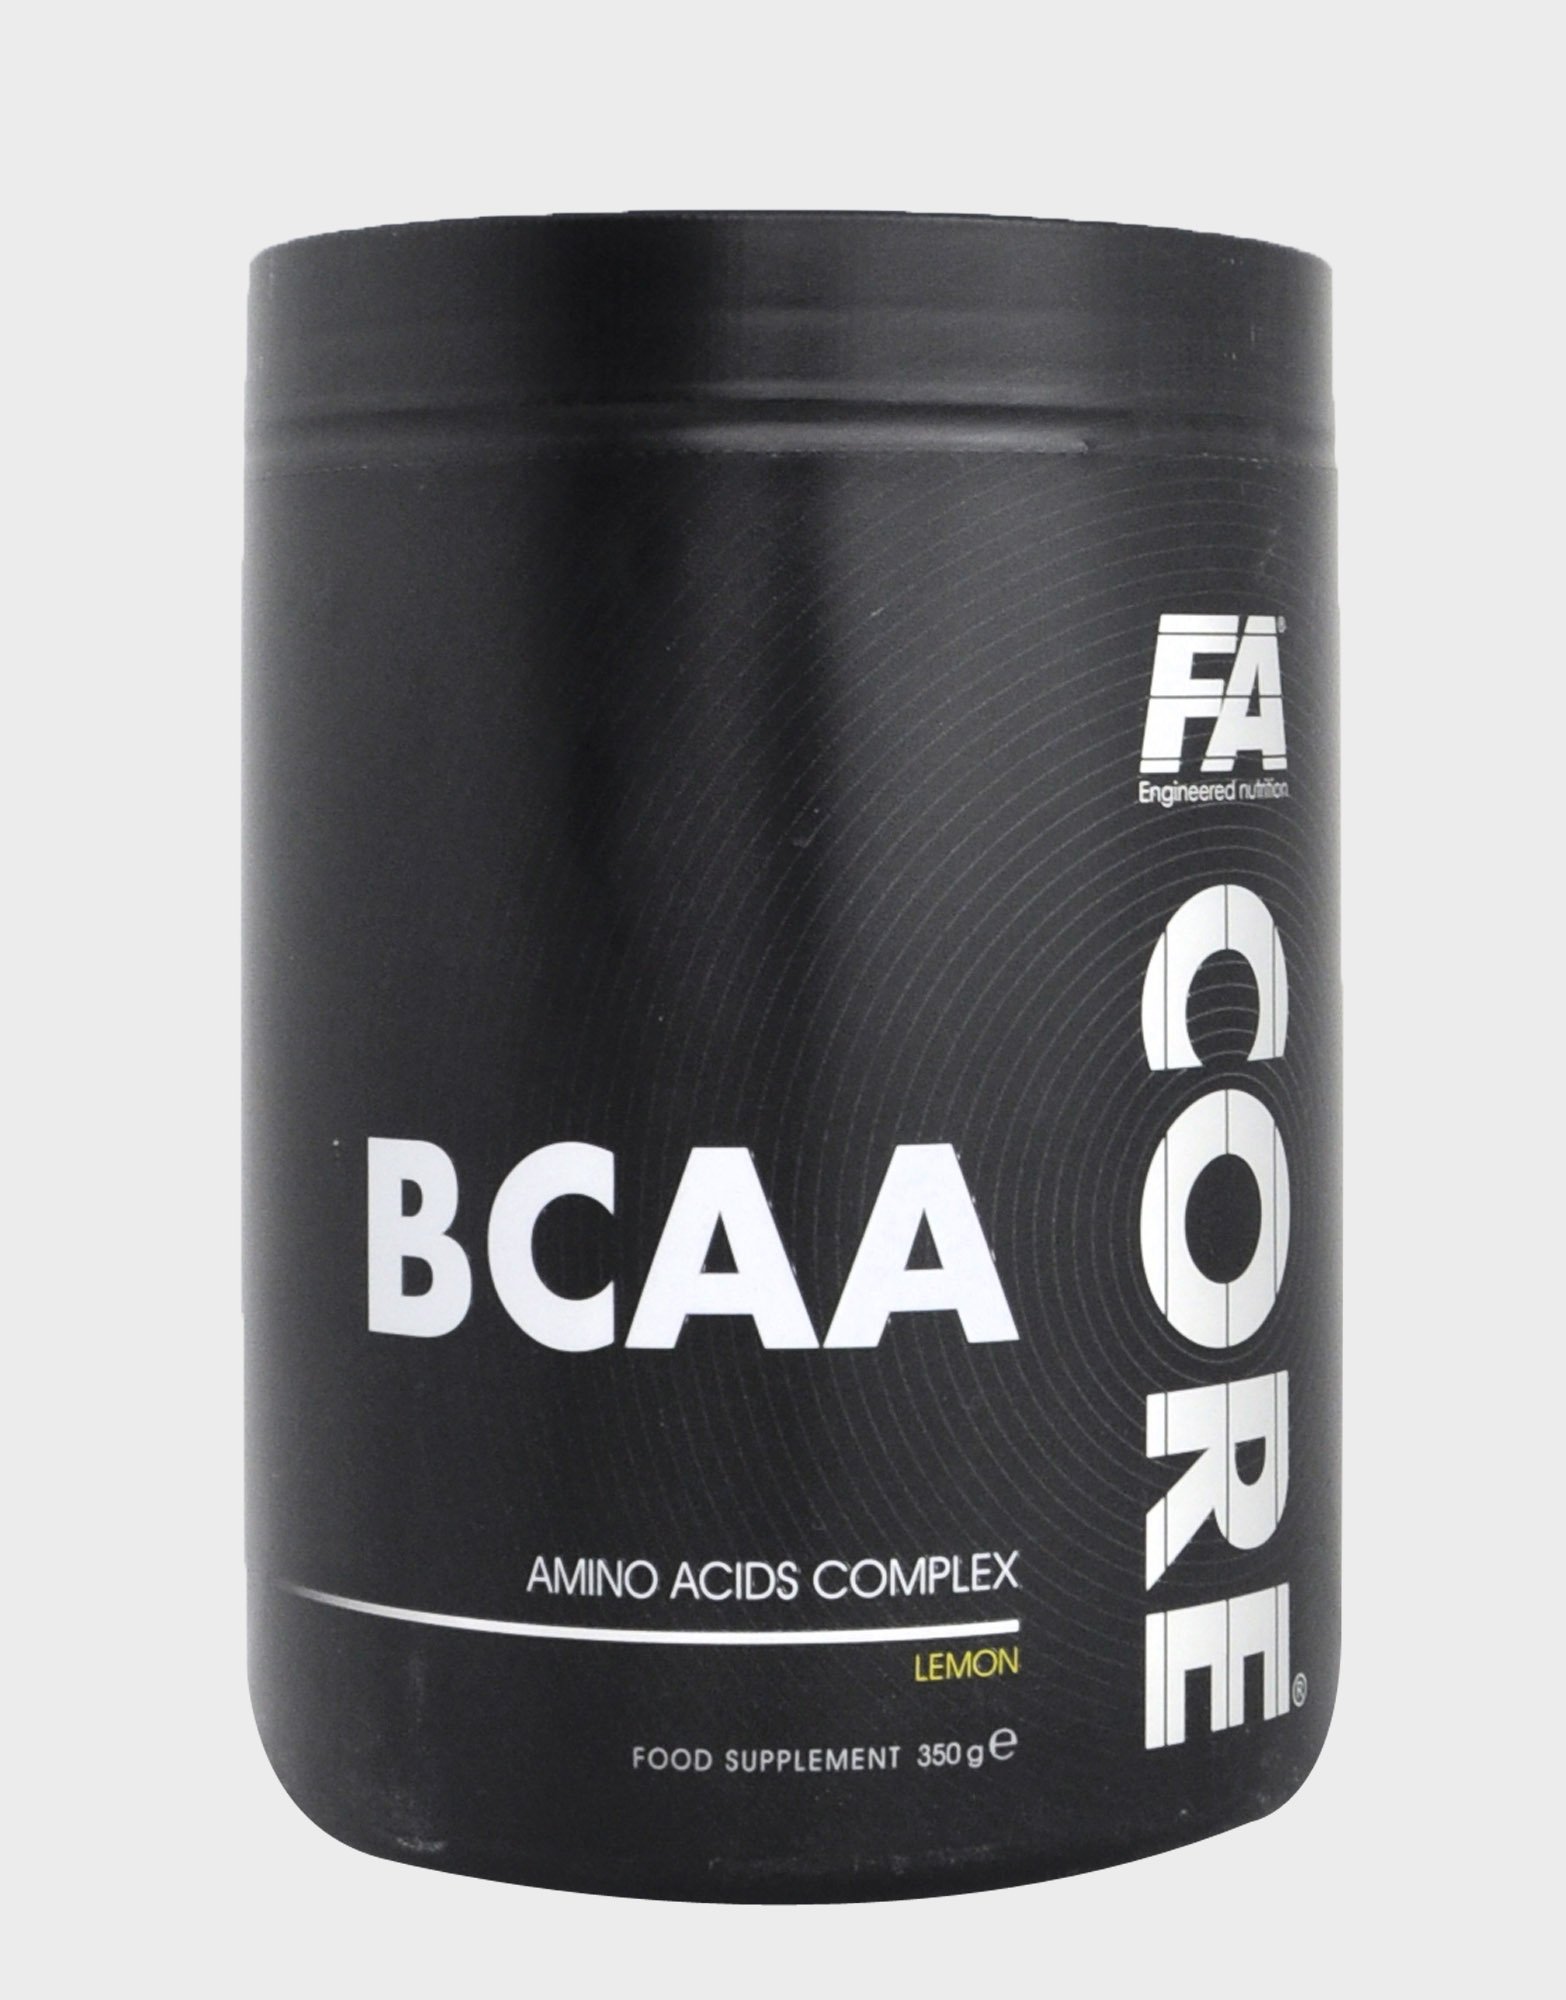 BCAA Core, 350 g, Fitness Authority. BCAA. Weight Loss recuperación Anti-catabolic properties Lean muscle mass 